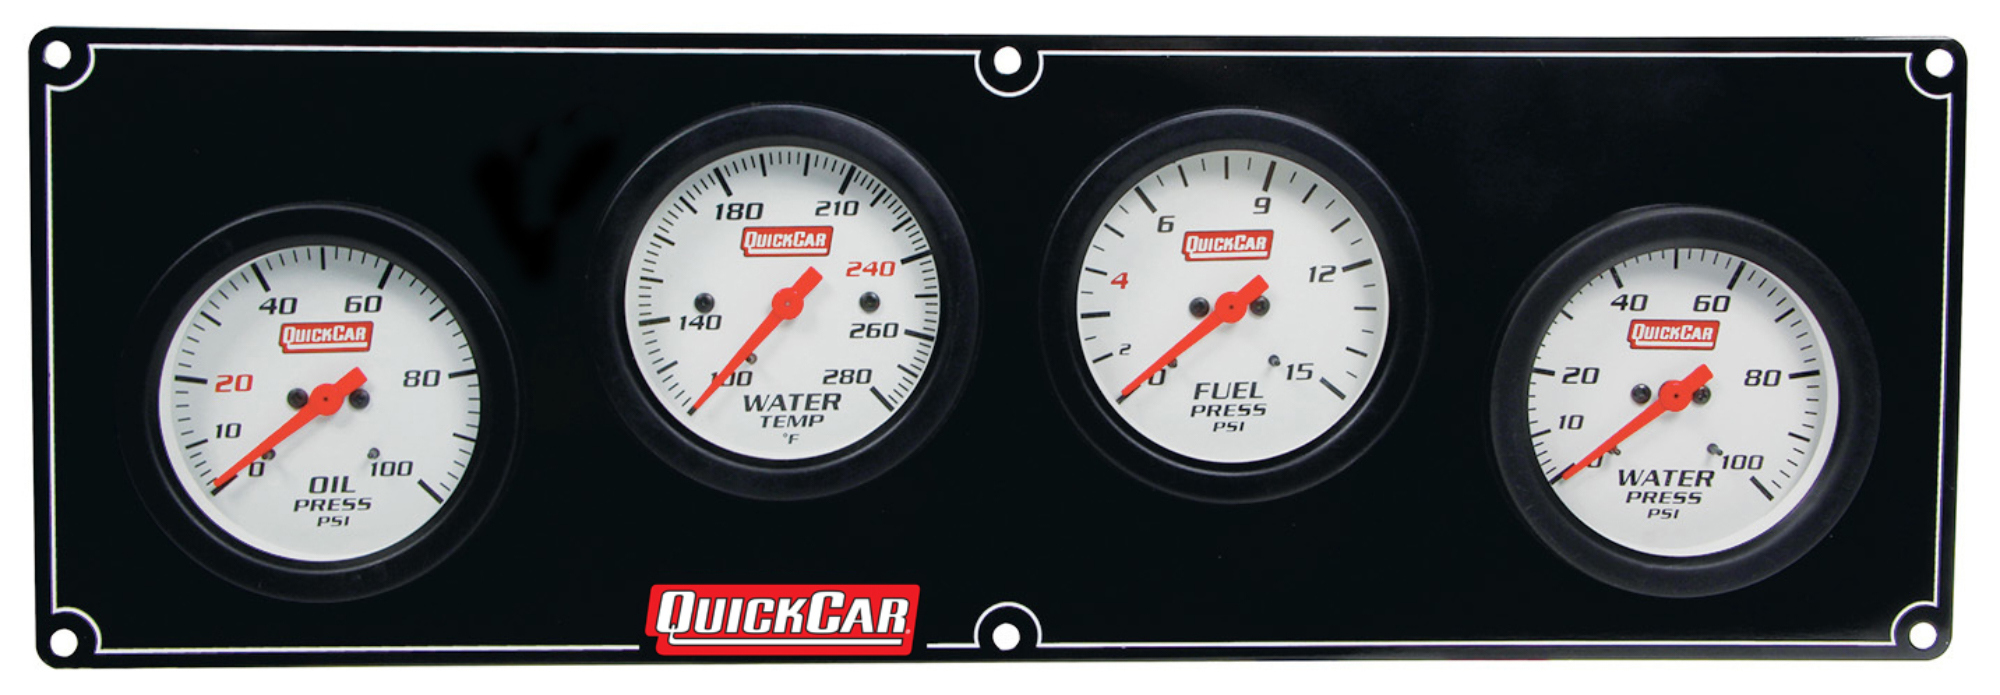 QuickCar 61-7026 Gauge Panel Assembly, Extreme, Oil Pressure / Water Temperature / Fuel Pressure / Water Pressure, White Face, Kit